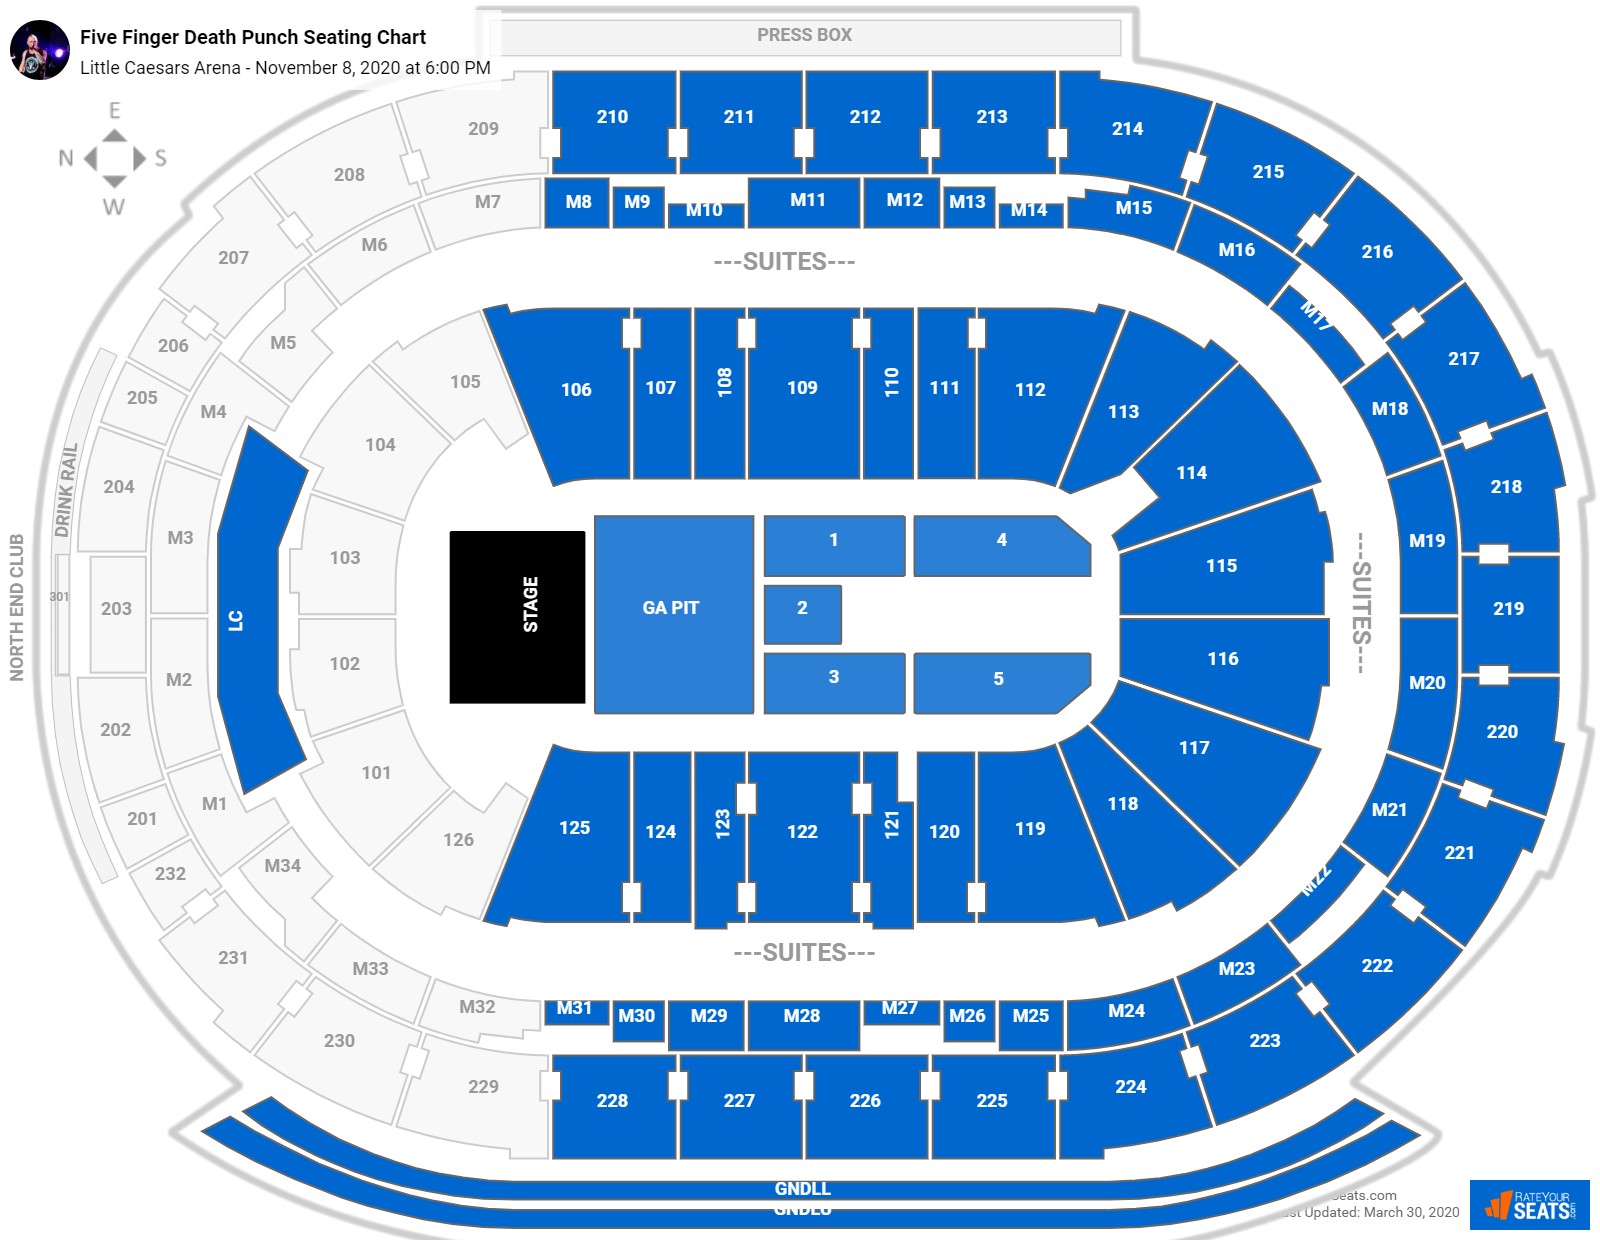 Little Caesars Arena Seating Charts for Concerts